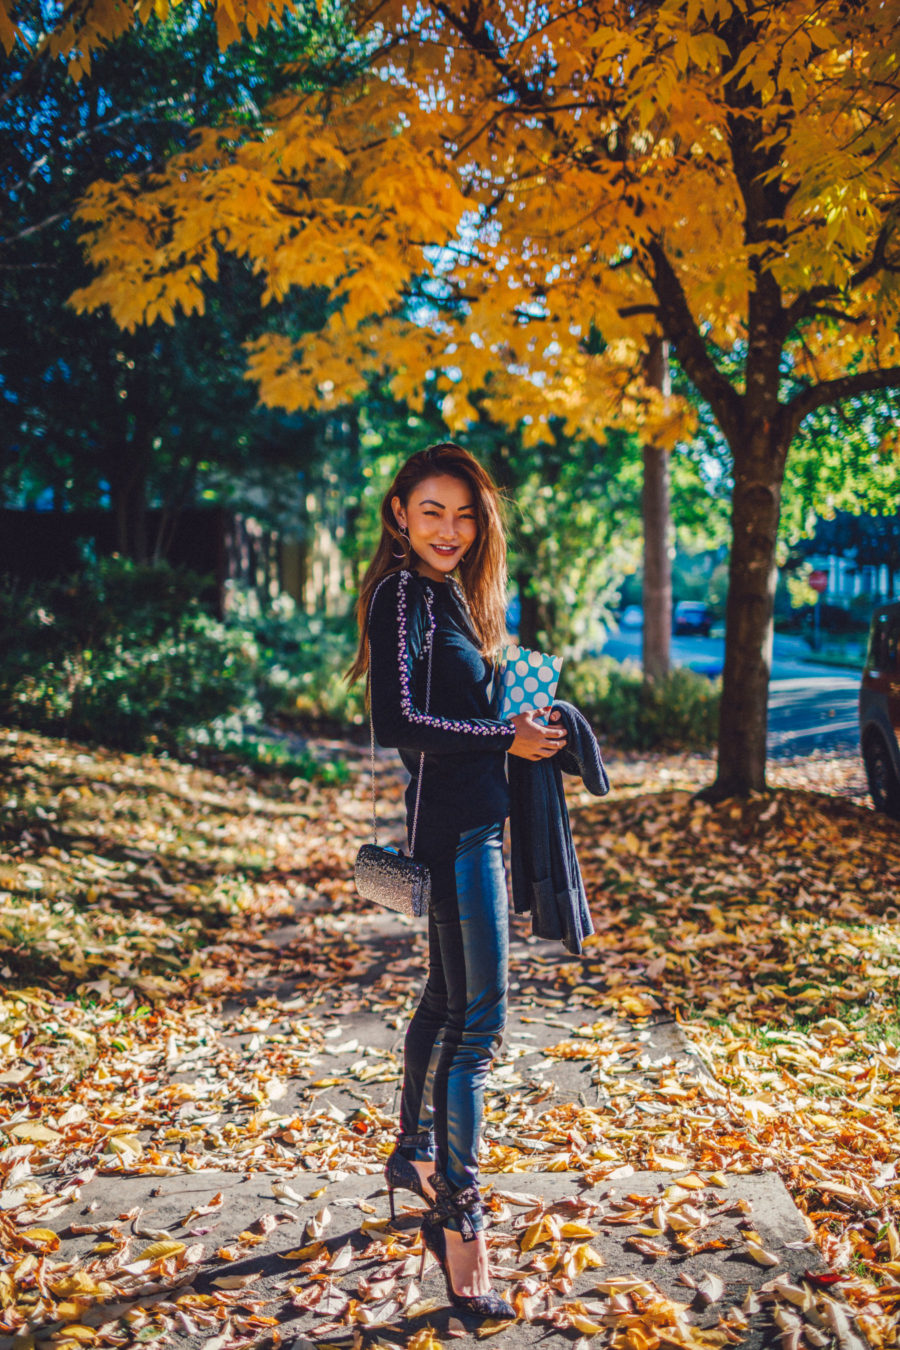 fall activities, fall leaves in nyc, fall portraits // Notjessfashion.com